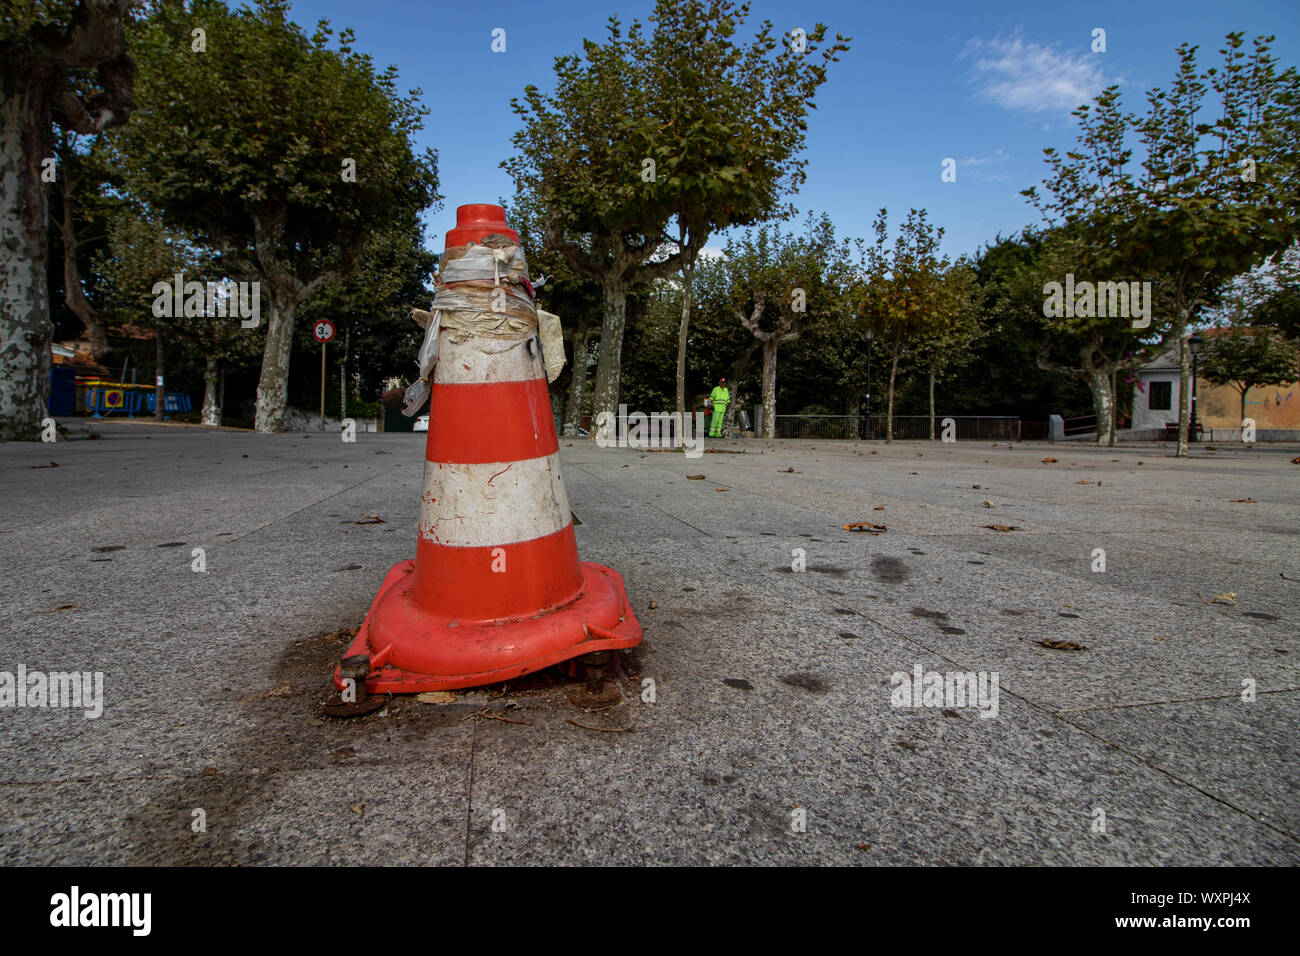 Cambre / Spain - September 16 2019: Old Red and white traffic cone covering the mounting plate for a broken floodlight in a plaza in Cambre Spain Stock Photo